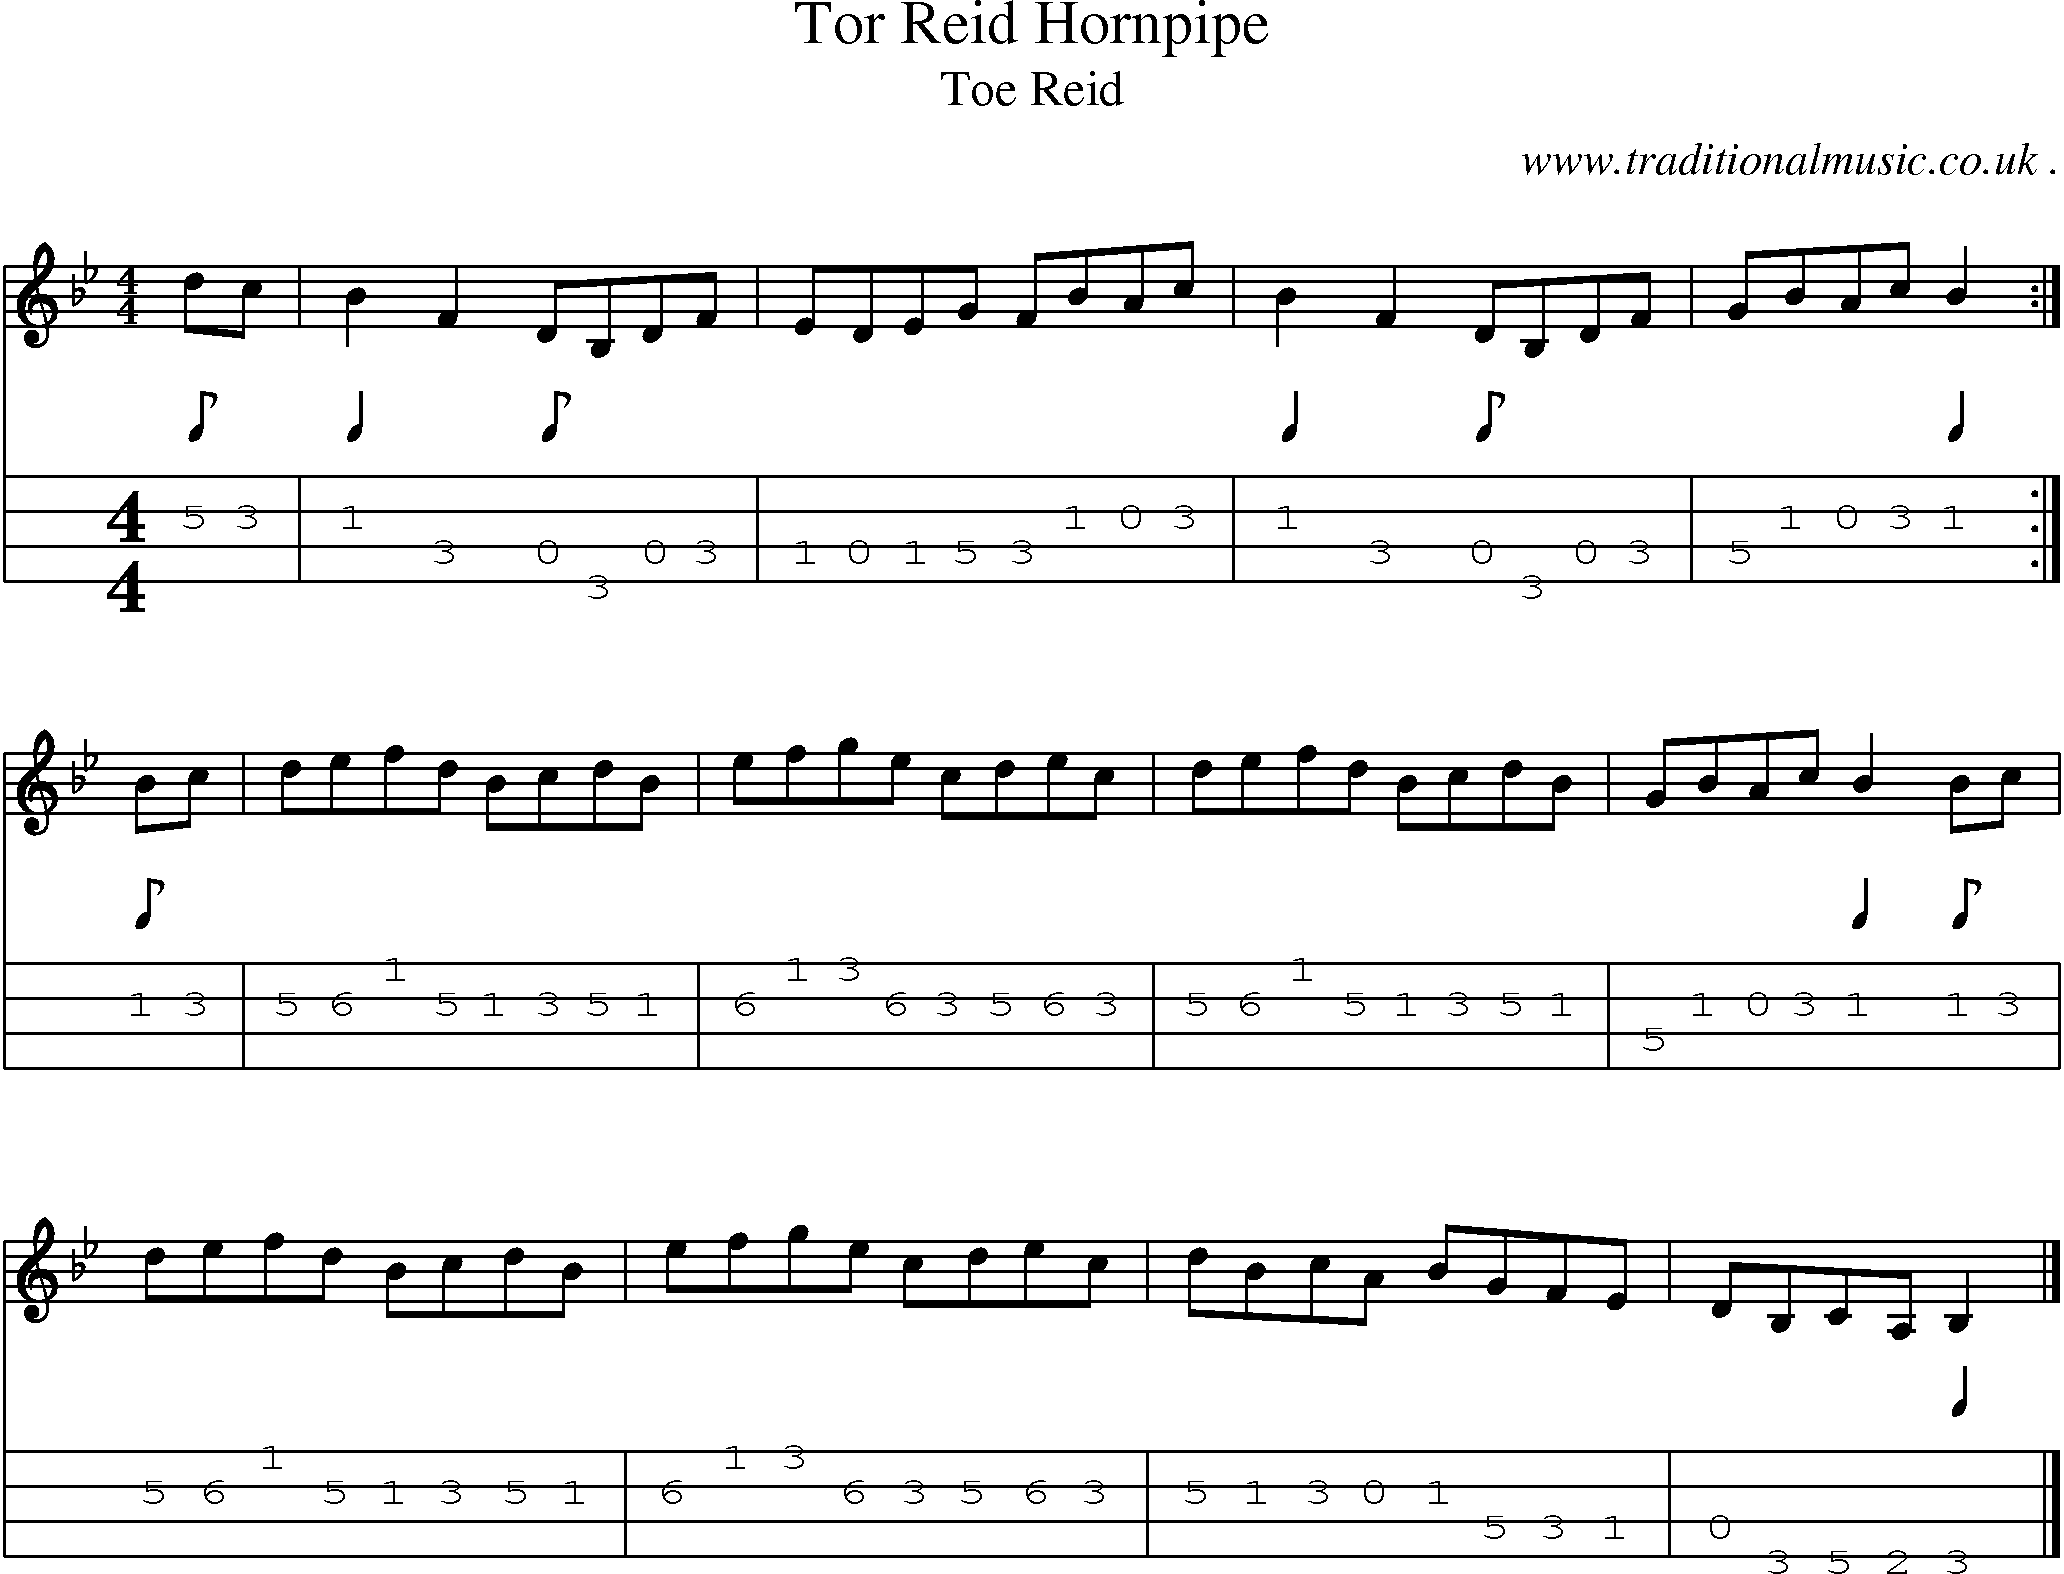 Sheet-music  score, Chords and Mandolin Tabs for Tor Reid Hornpipe